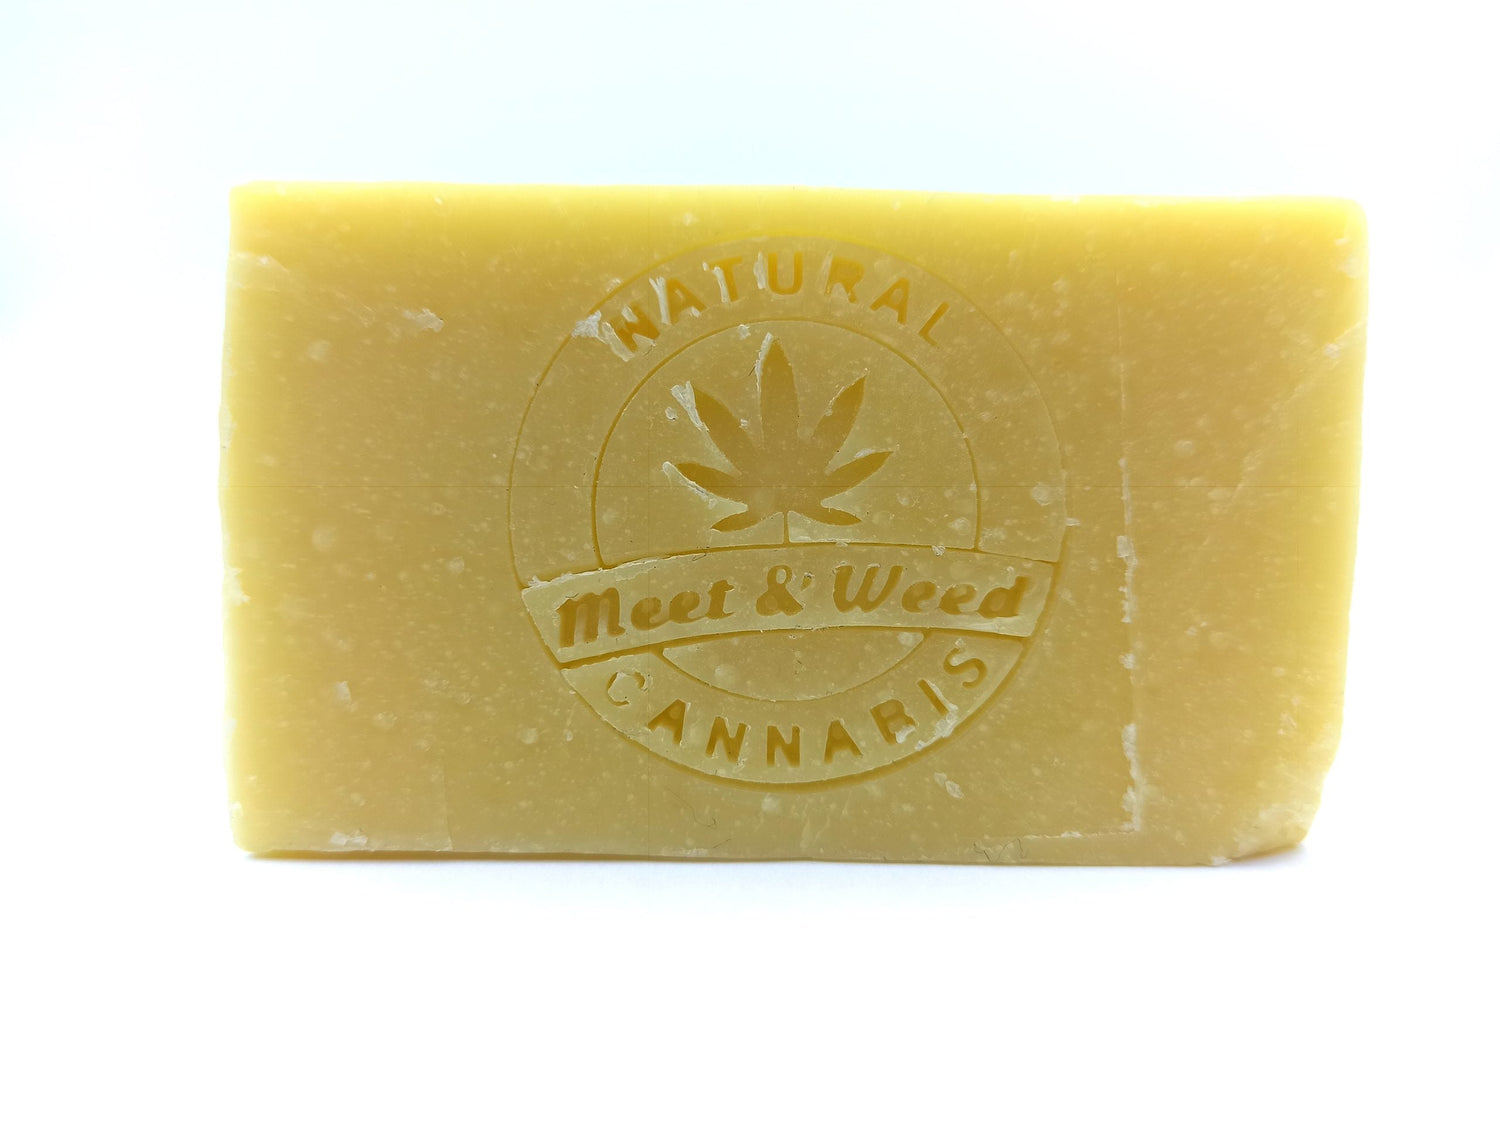 Meet&amp;amp;Weed soap